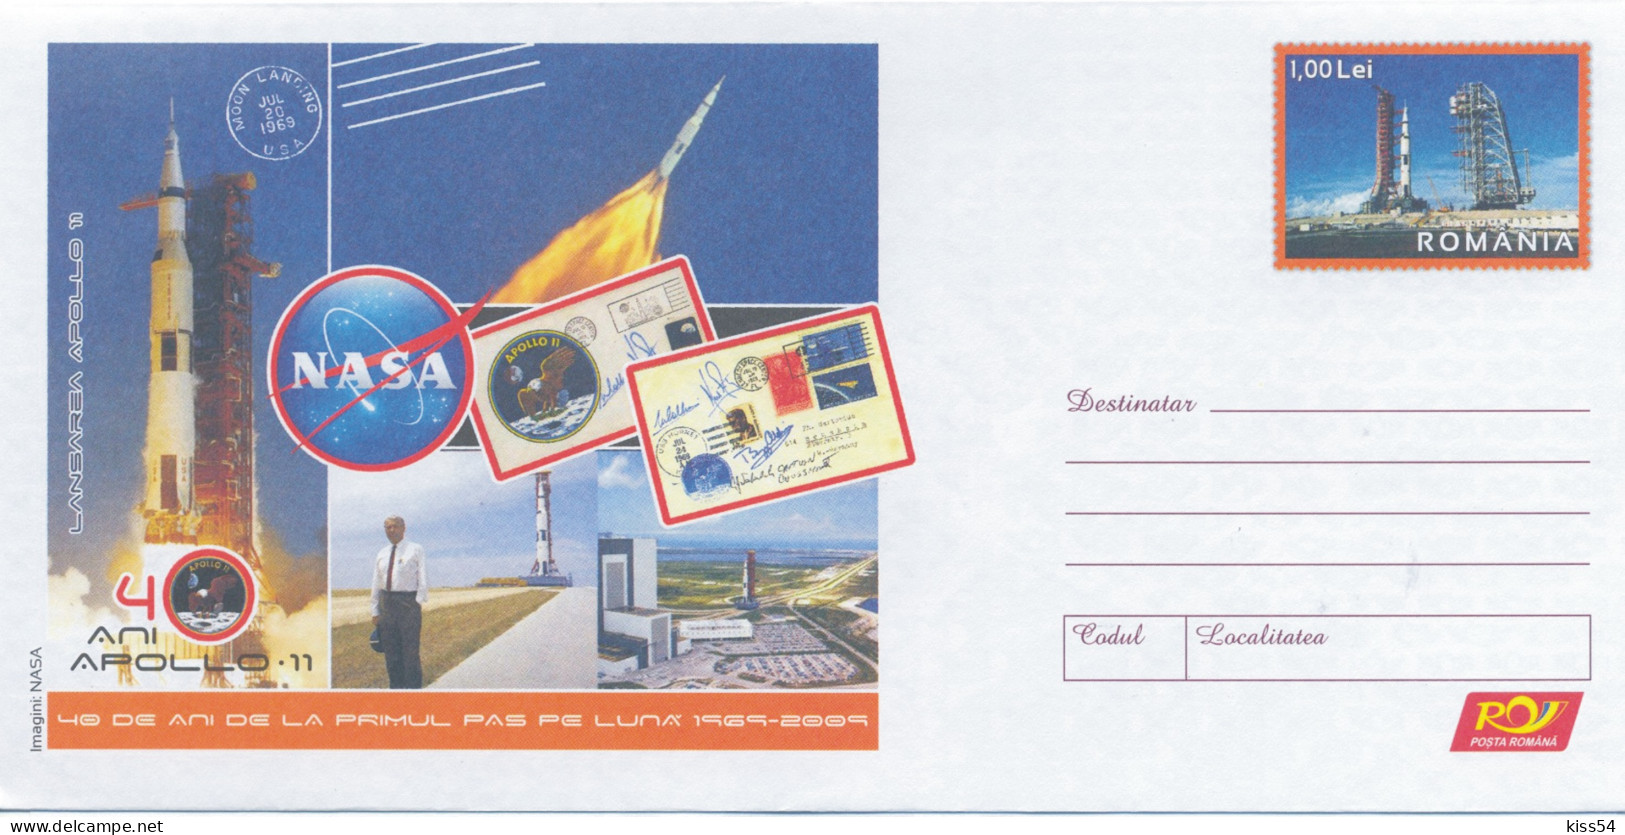 IP 2009 - 30 Cosmos, 40 YEARS SINCE DE FIRST STEP ON THE MOON - Stationery - Unused - 2009 - Interi Postali